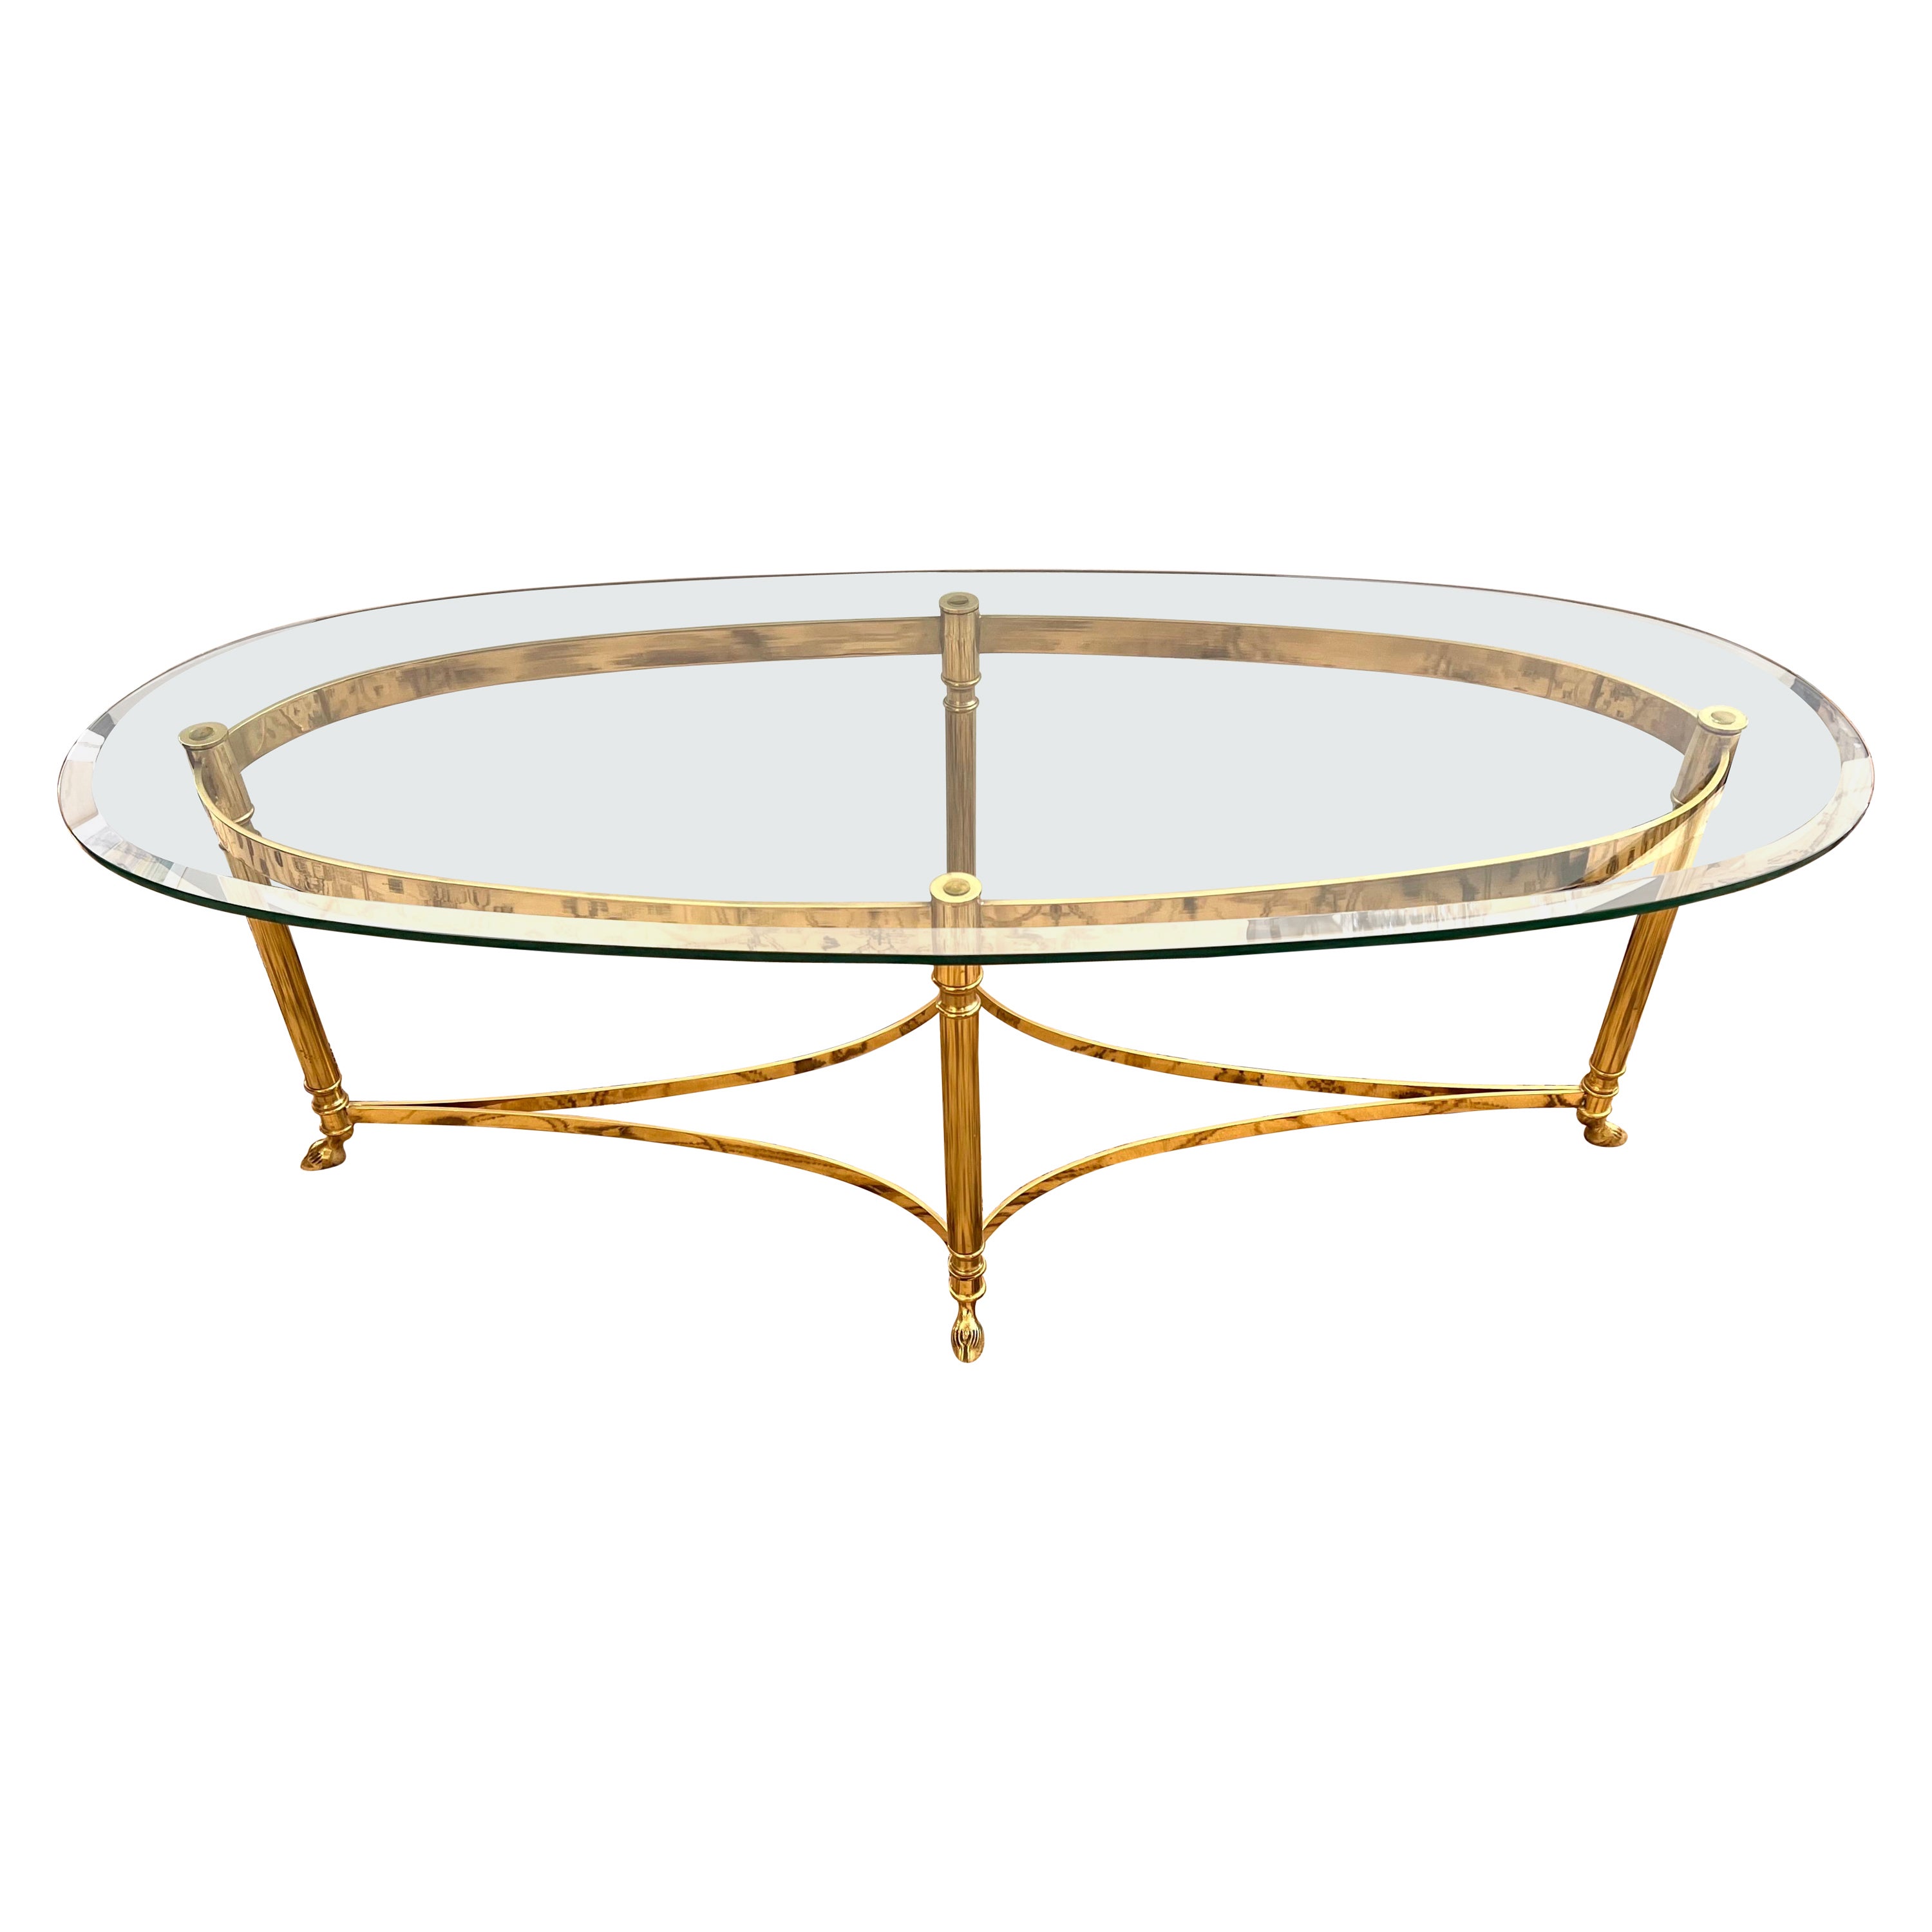 MCM Maison Jansen Inspired Brass and Glass Oval Cocktail Coffee Table